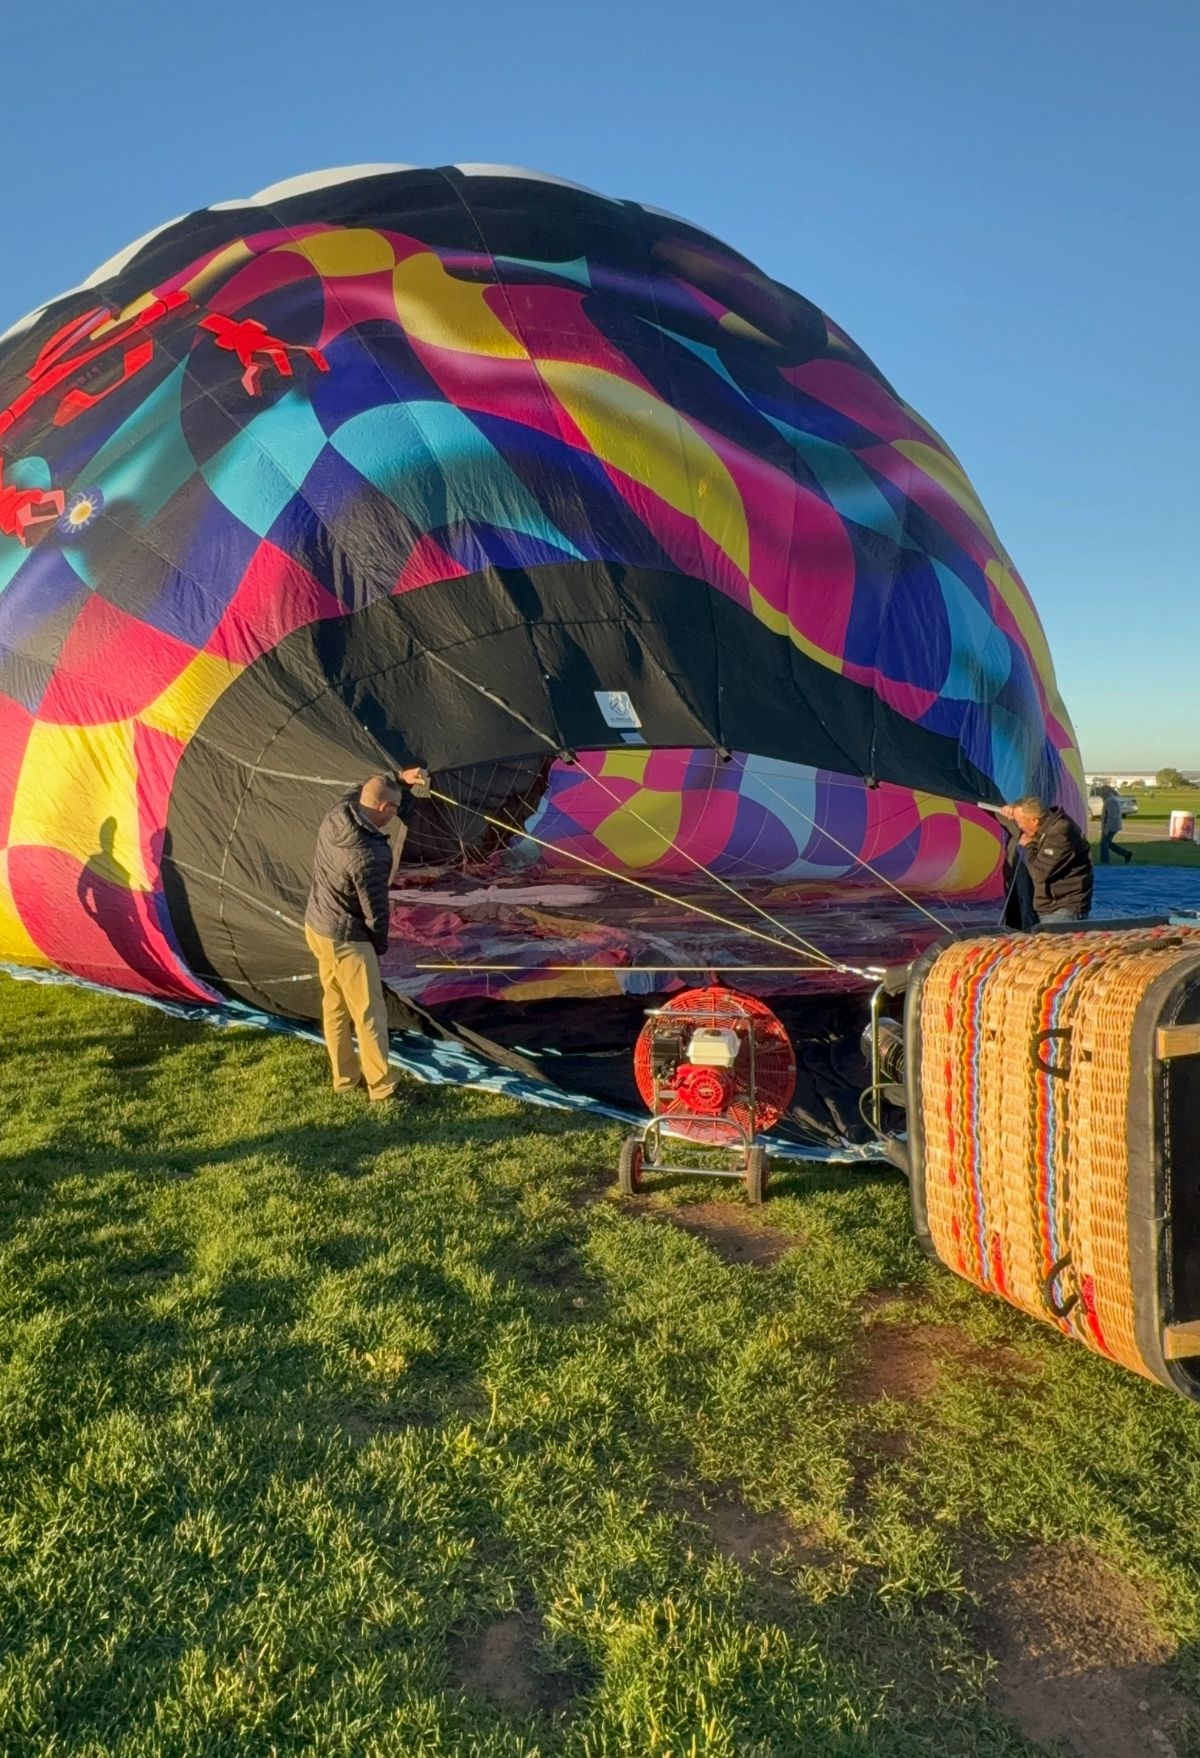 A hot air balloon is being inflated on a grassy field.